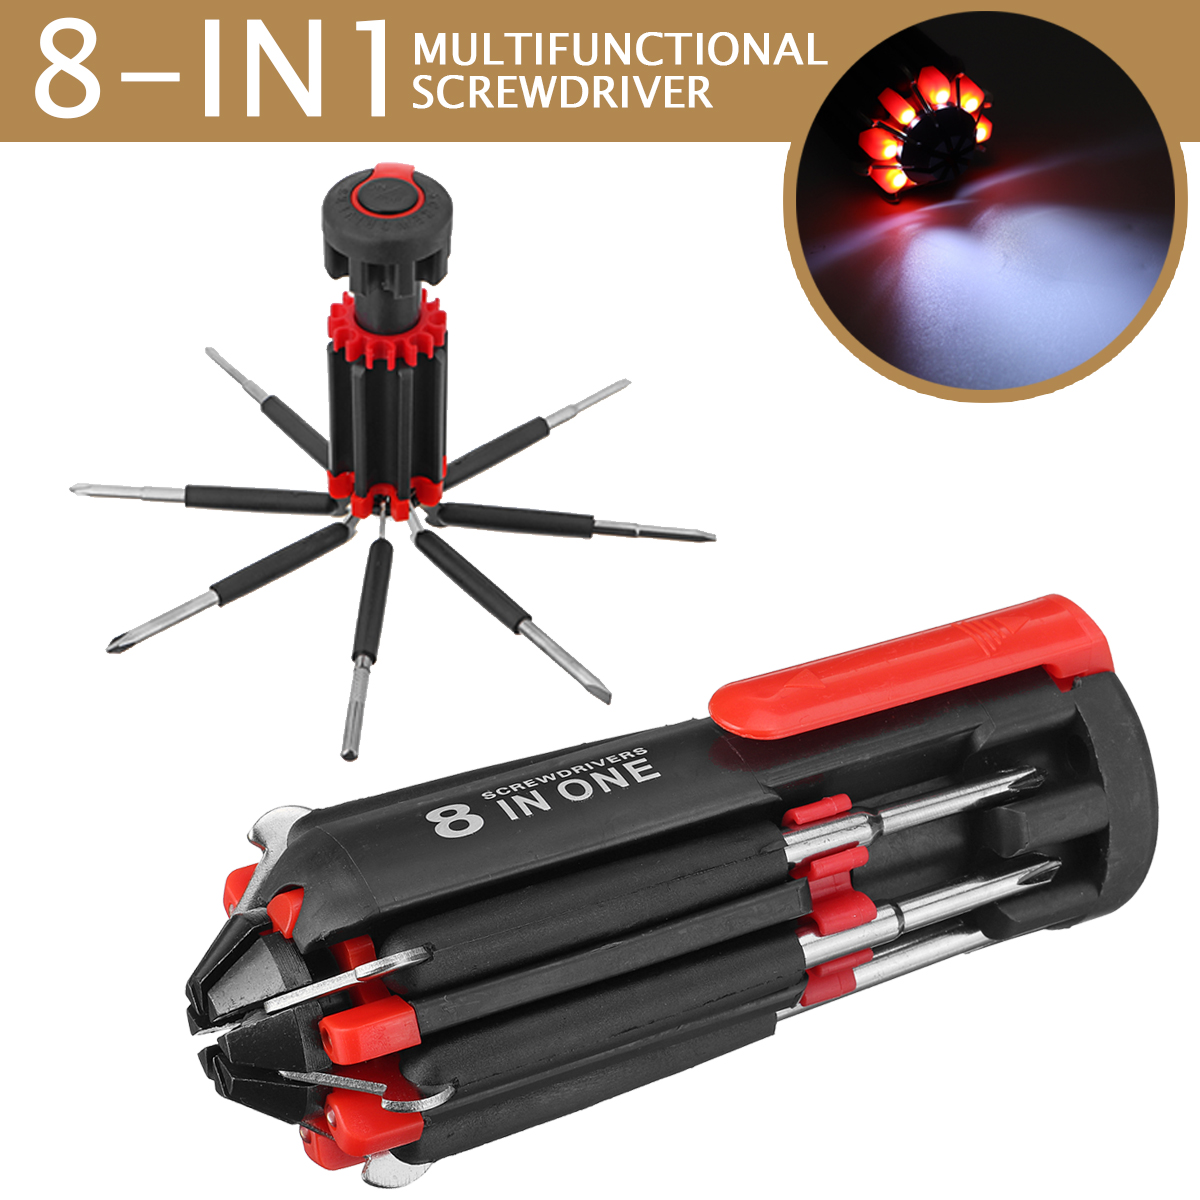 8-in-1-Multifunctional-Screwdriver-Cellphones-Watches-Home-Appliances-Repair-Tools-with-Light-1667233-2